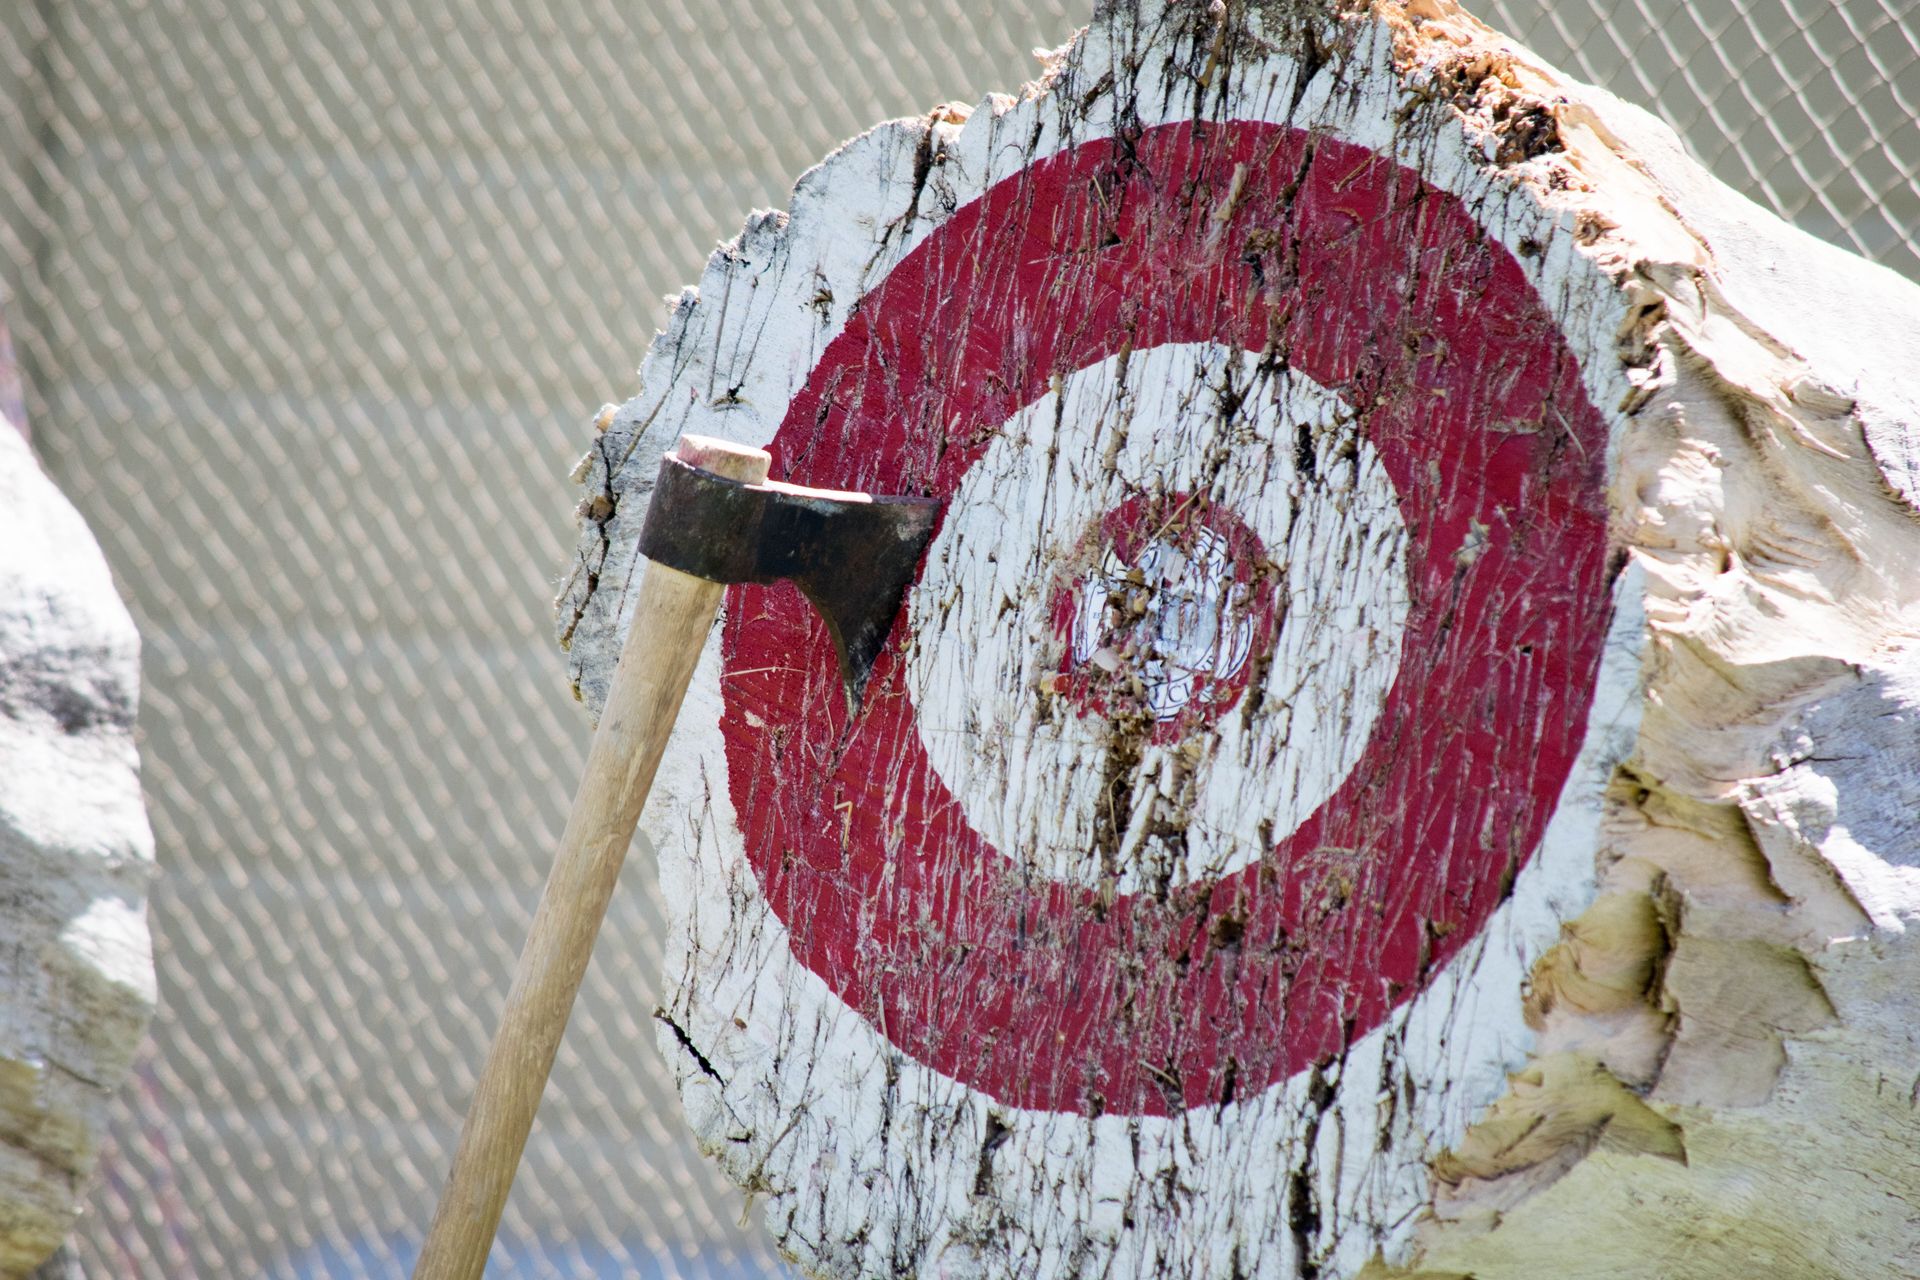 Frequently Asked Questions About Axe Throwing